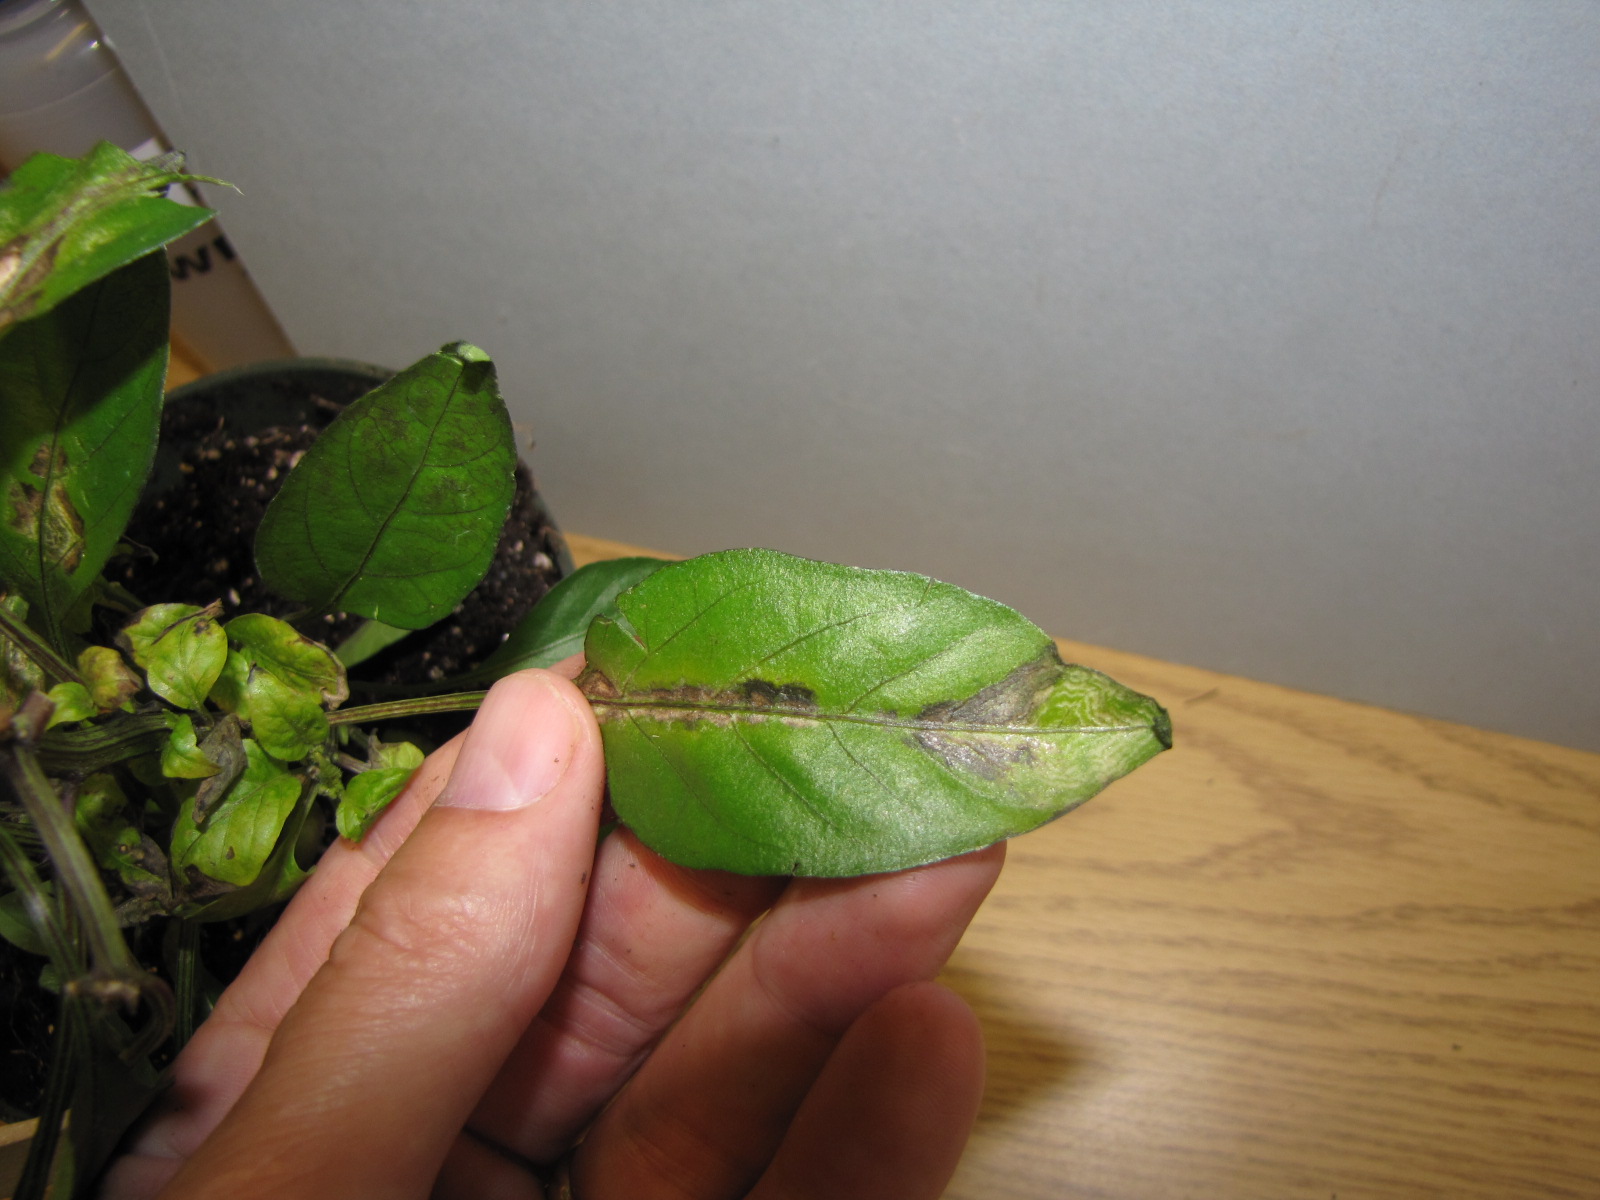 Figure 1. Lesion with ring-like structure due to tomato spotted wilt virus on pepper.